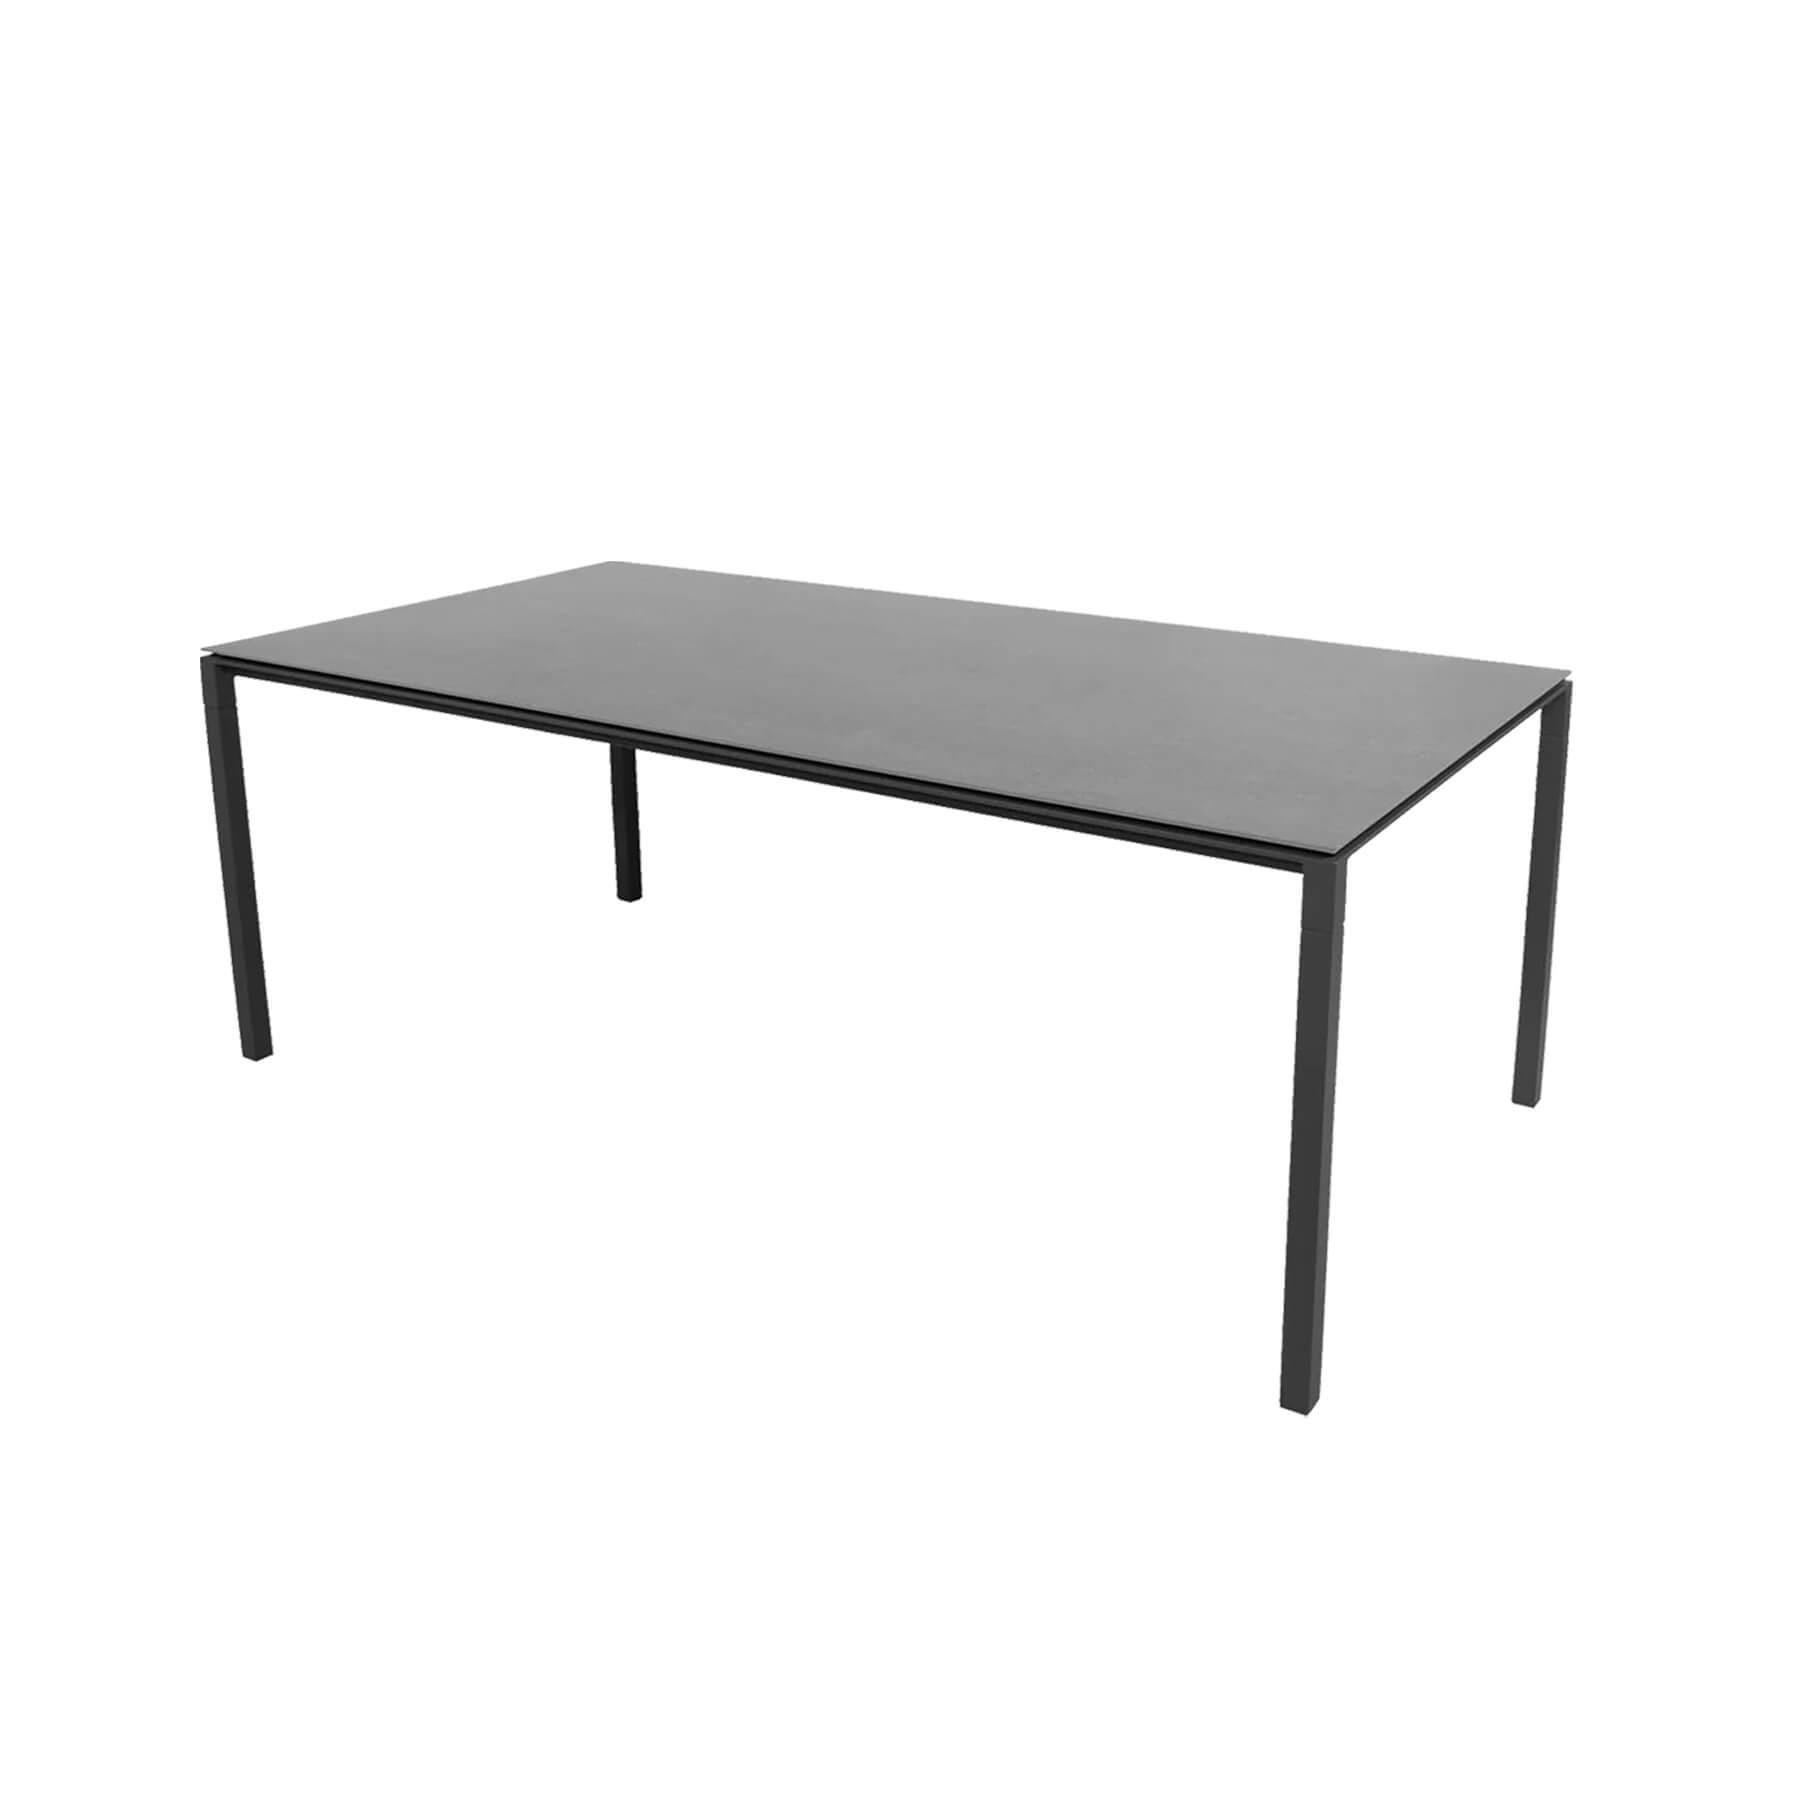 Caneline Pure Outdoor Dining Table Large Ceramic Basalt Top Lava Grey Legs